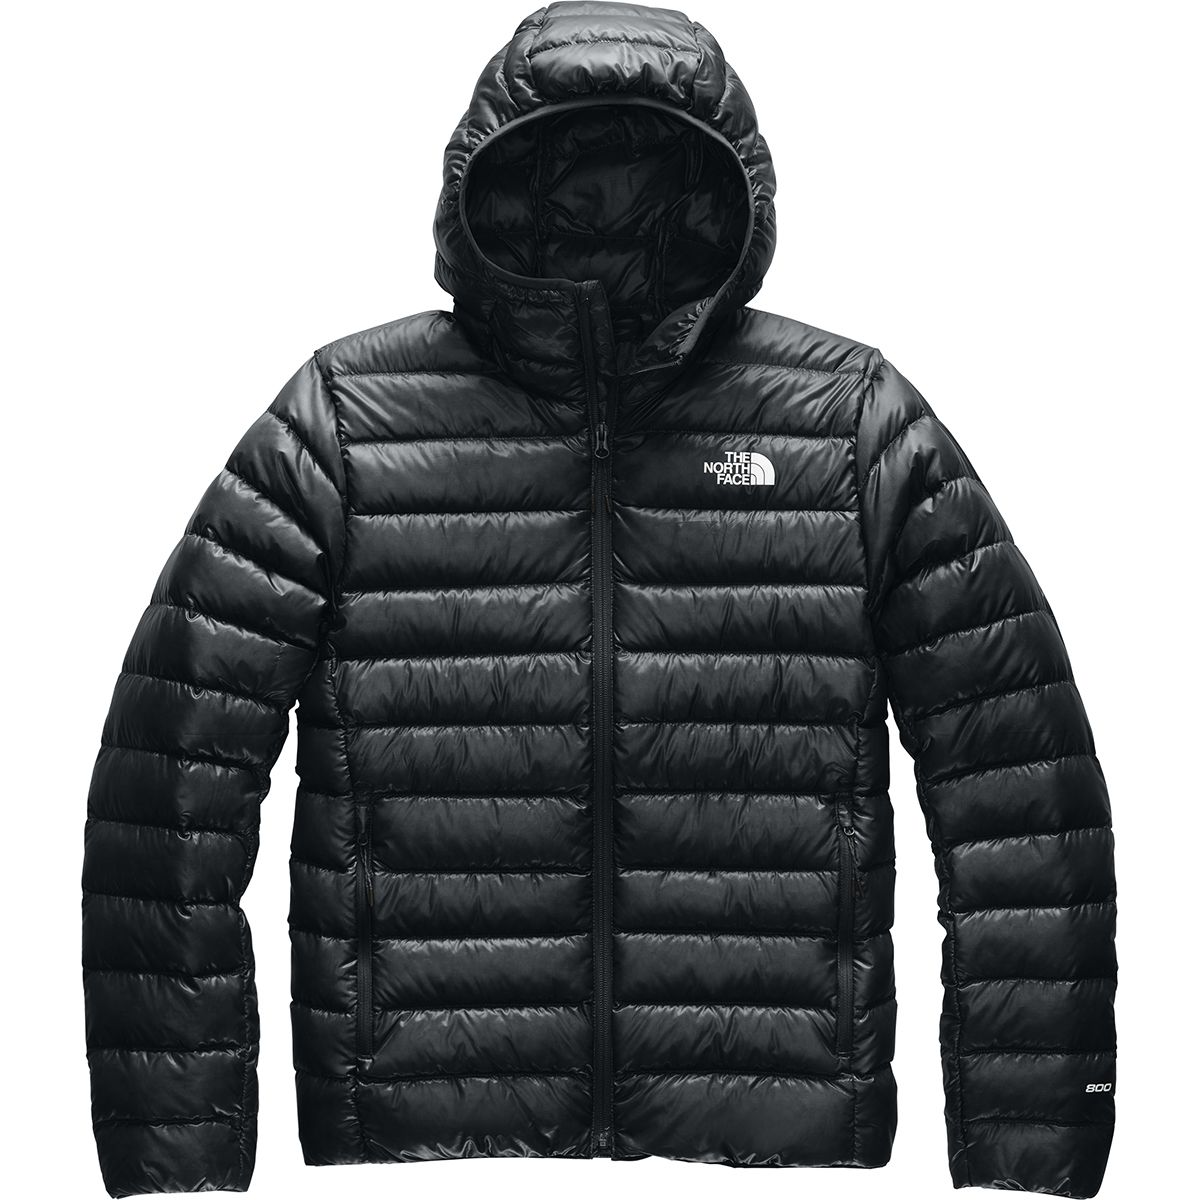 THE NORTH FACE☆22-23AW M'S UTILITY FIELD JACKET_NJ3BN51 (THE